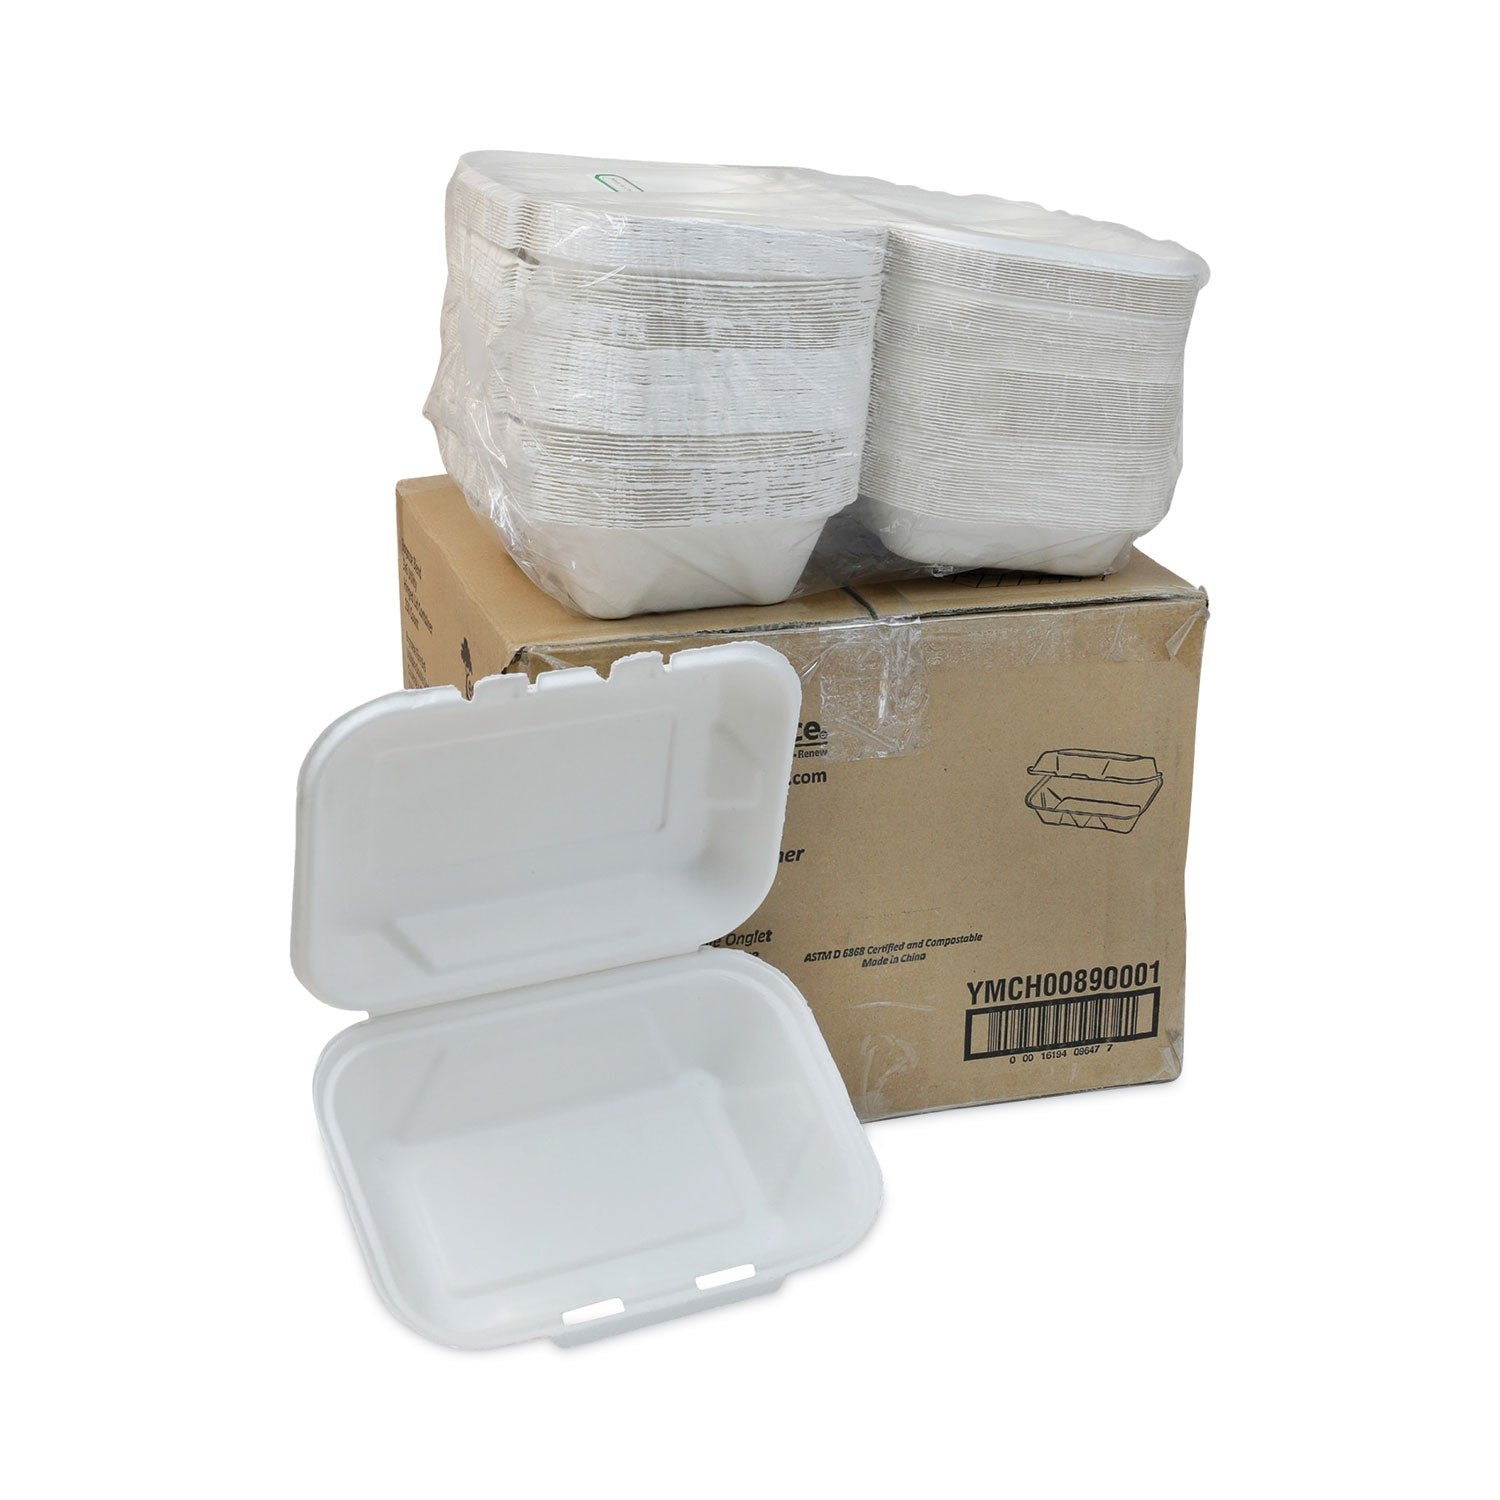 earthchoice-bagasse-hinged-lid-container-dual-tab-lock-91-x-61-x-33-natural-sugarcane-150-carton_pctymch00890001 - 3